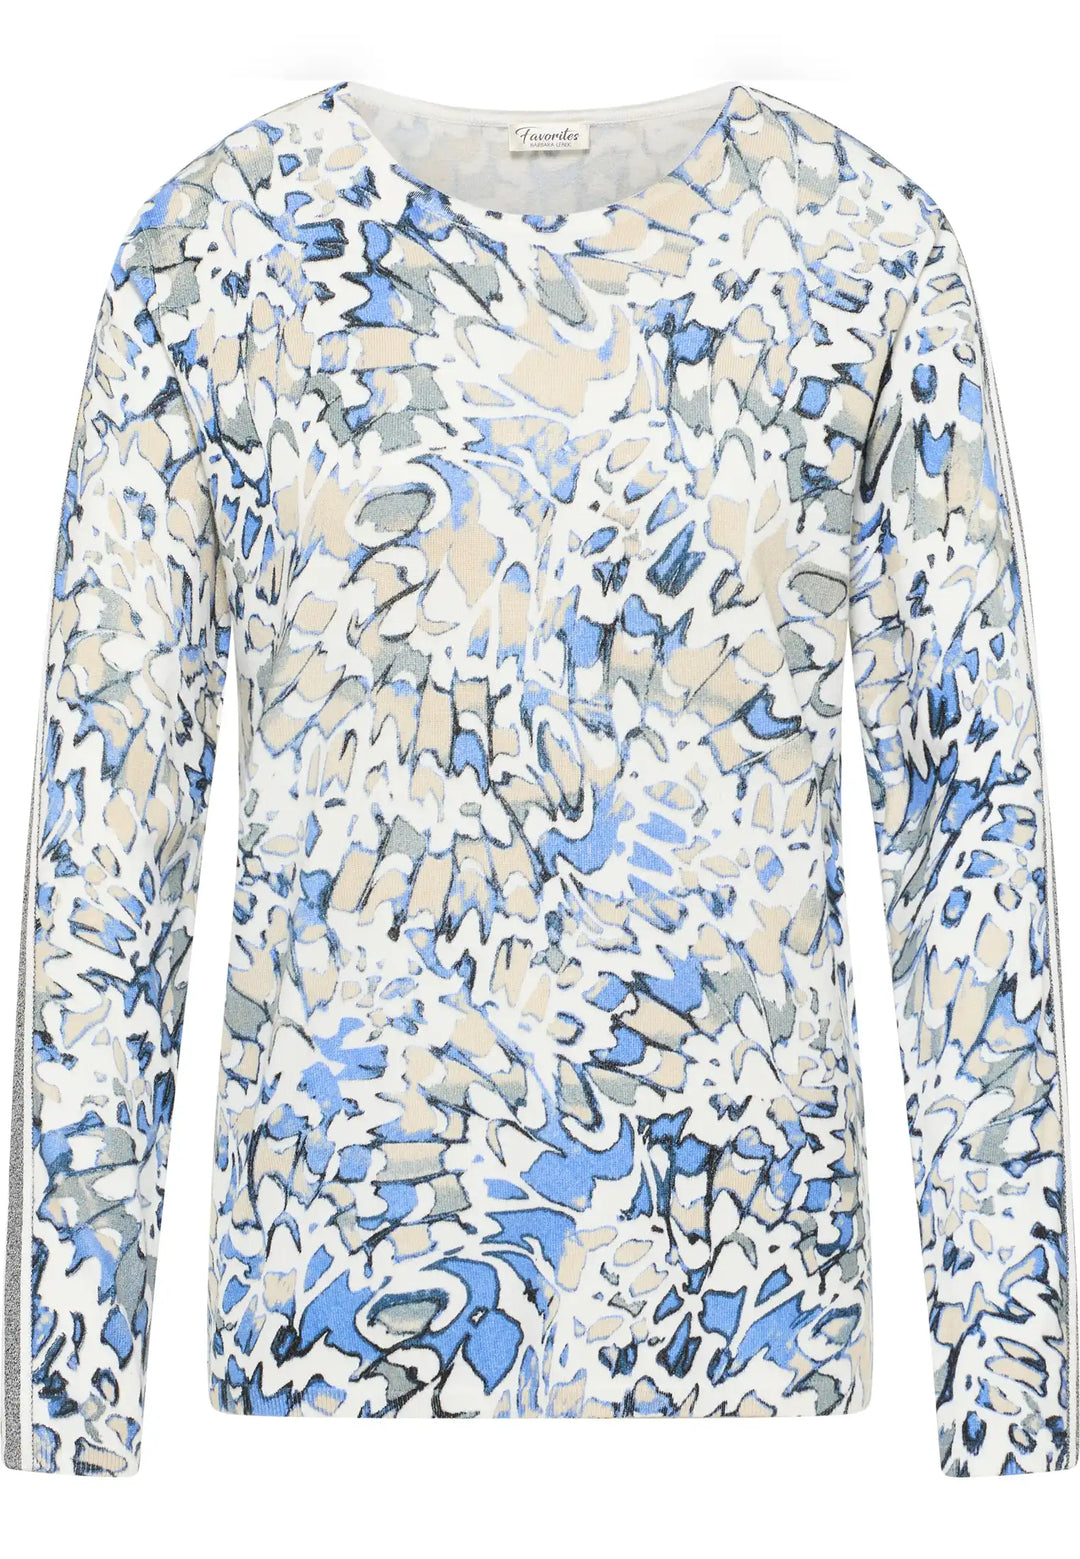 Long-sleeved top with an abstract blue, beige, and grey watercolour print, offering a classic crew neck and an elegant, flowing design that combines art with comfort in everyday apparel, style 55130042-930 